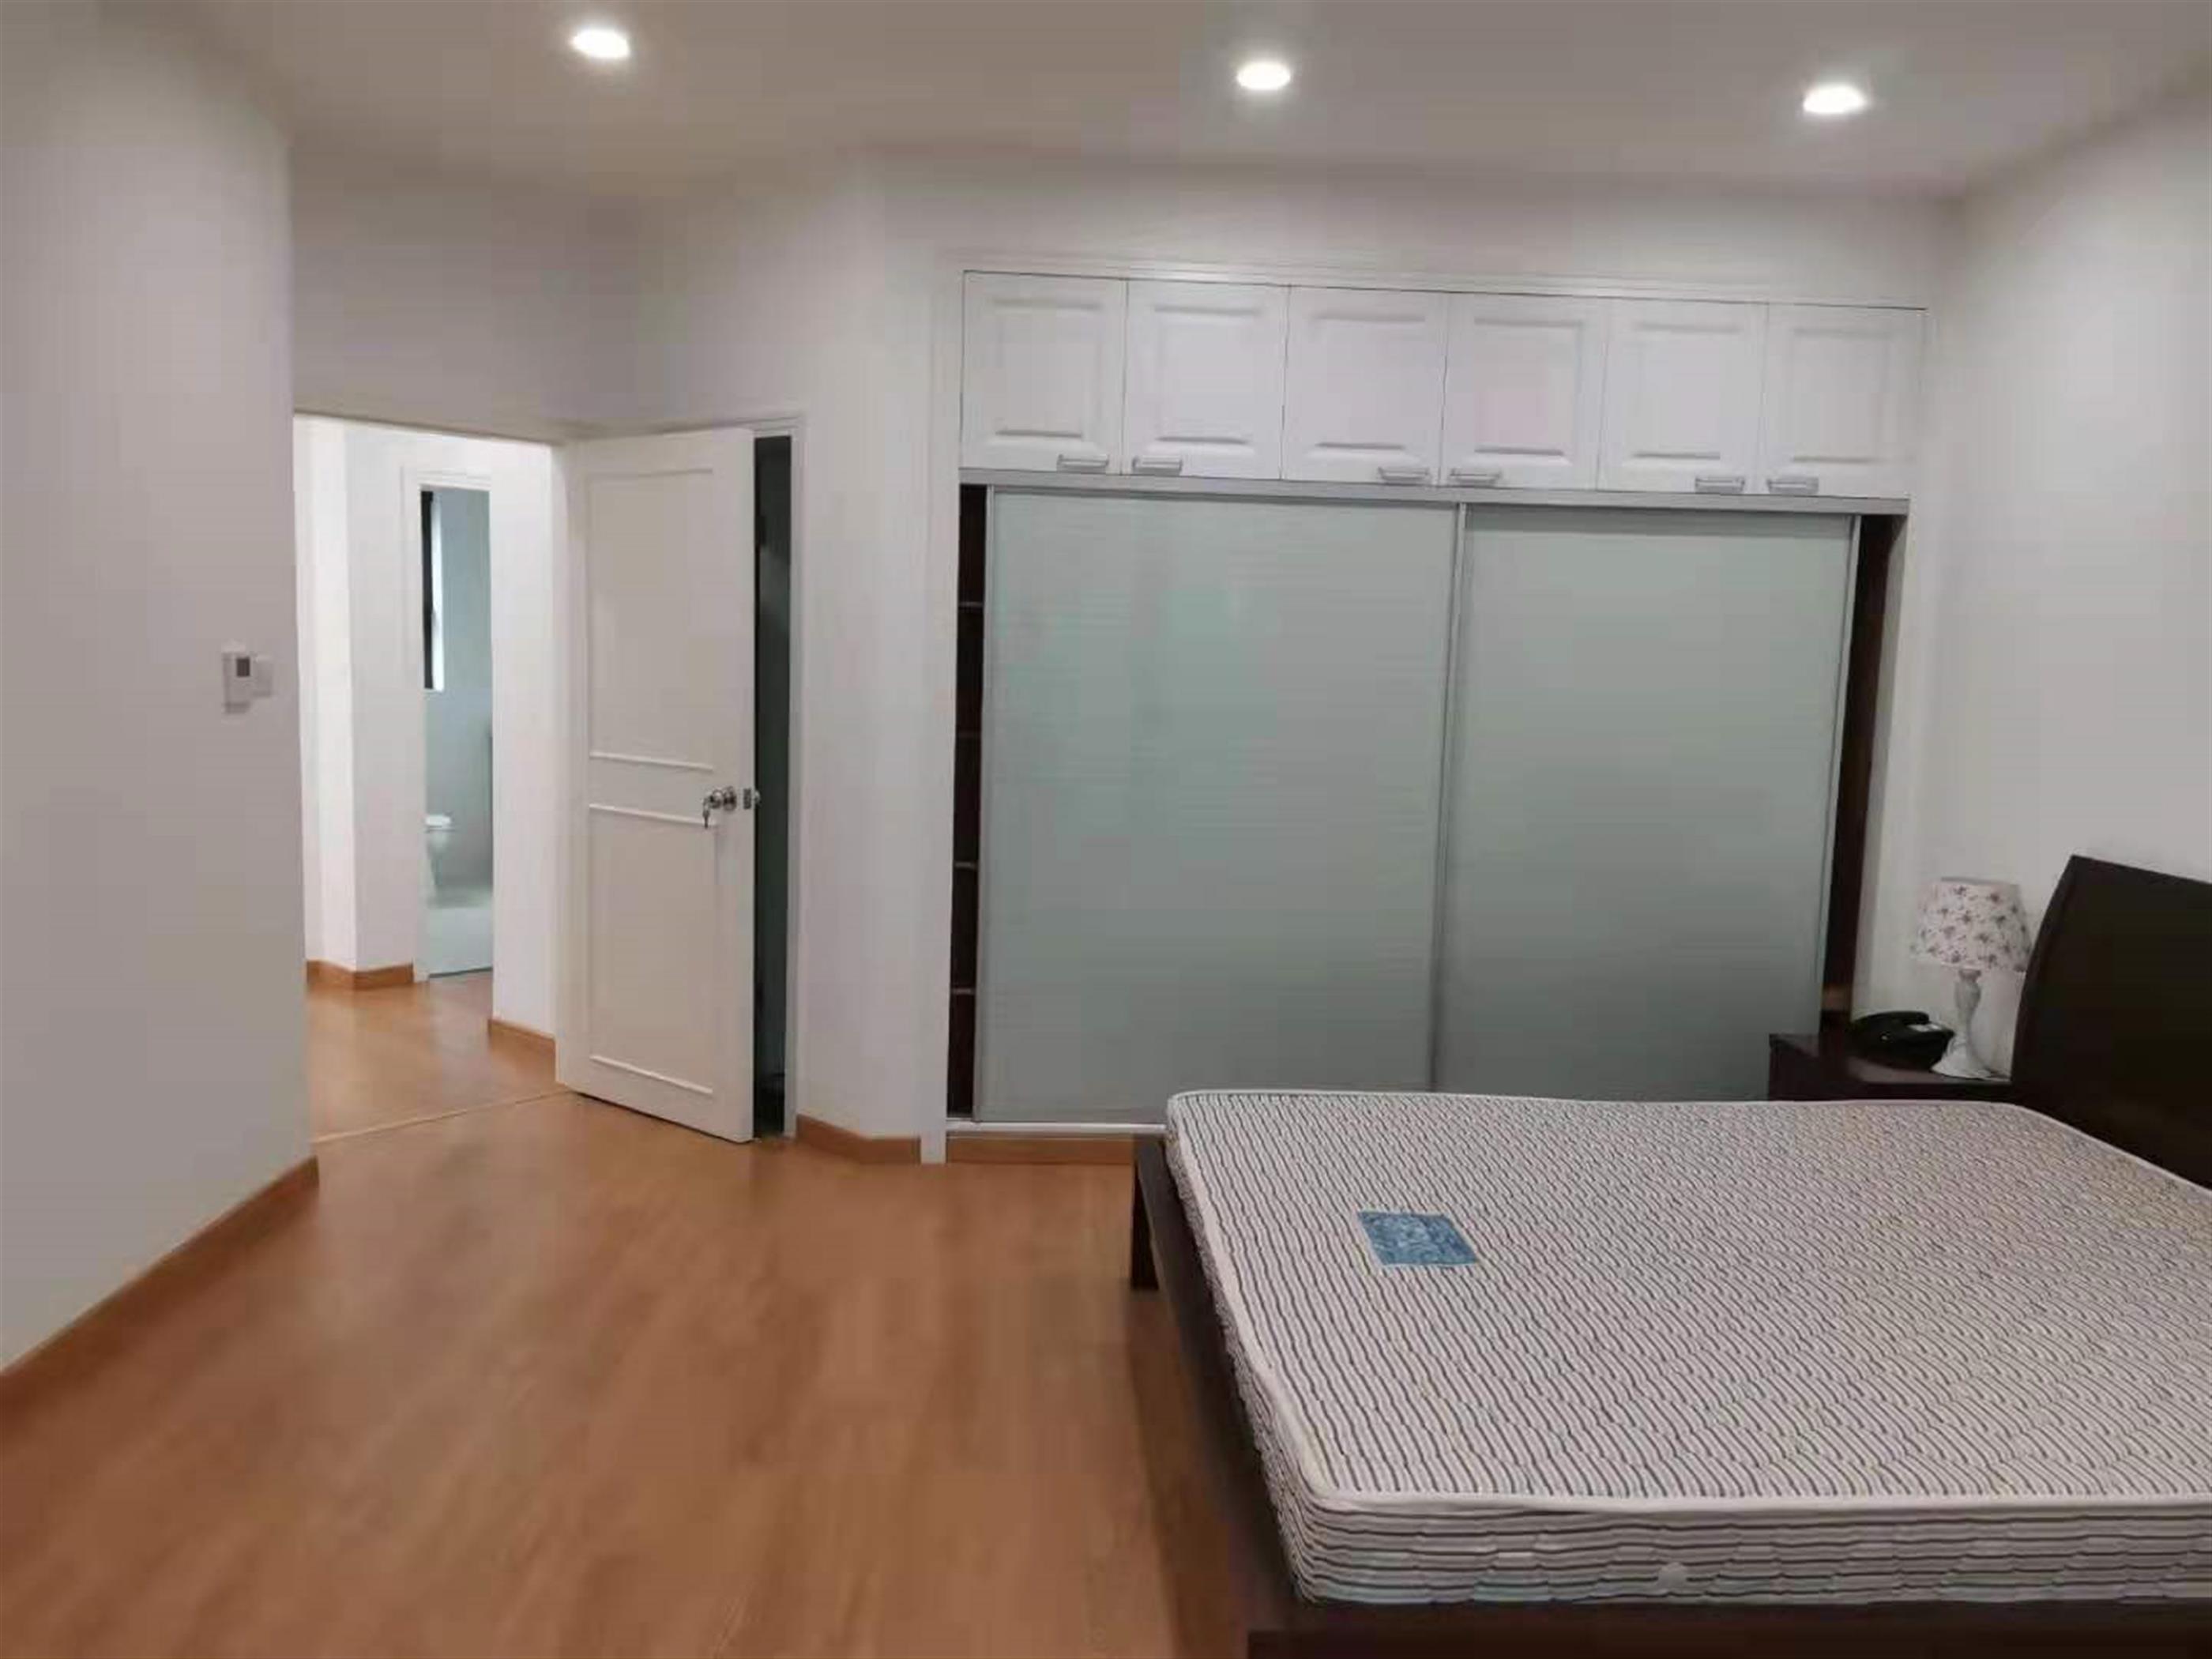 Large Bedroom Bright Spacious Convenient 4BR Villa nr LN 10 for Rent near Shanghai Zoo